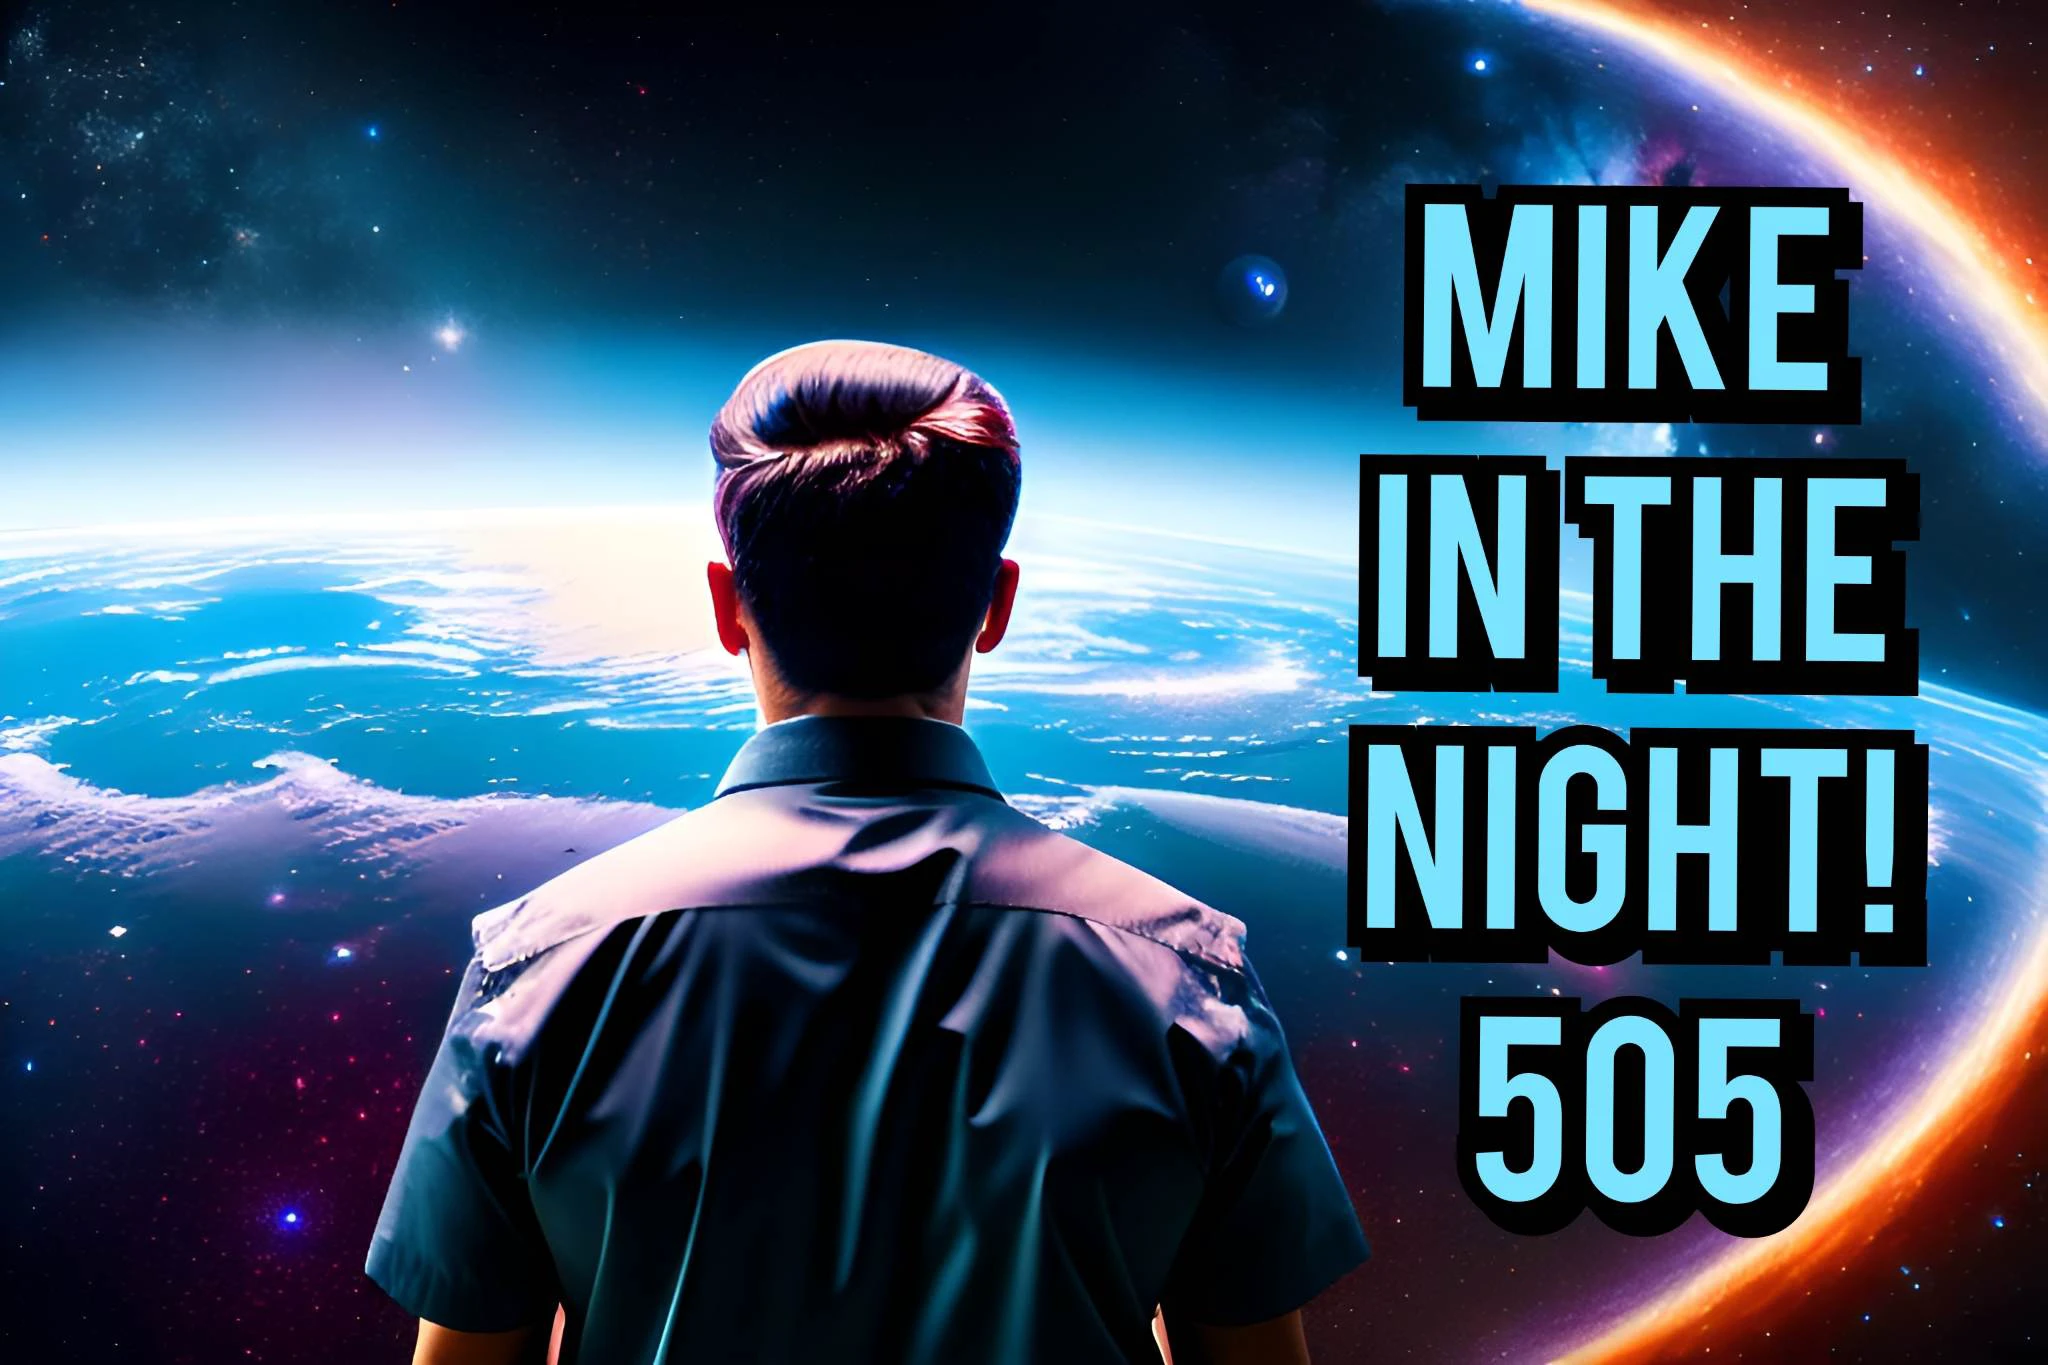 Mike in the Night! E505,  James Roguski Exposes Major WHO Diabolical Plan,  Call ins from across the Commonwealth